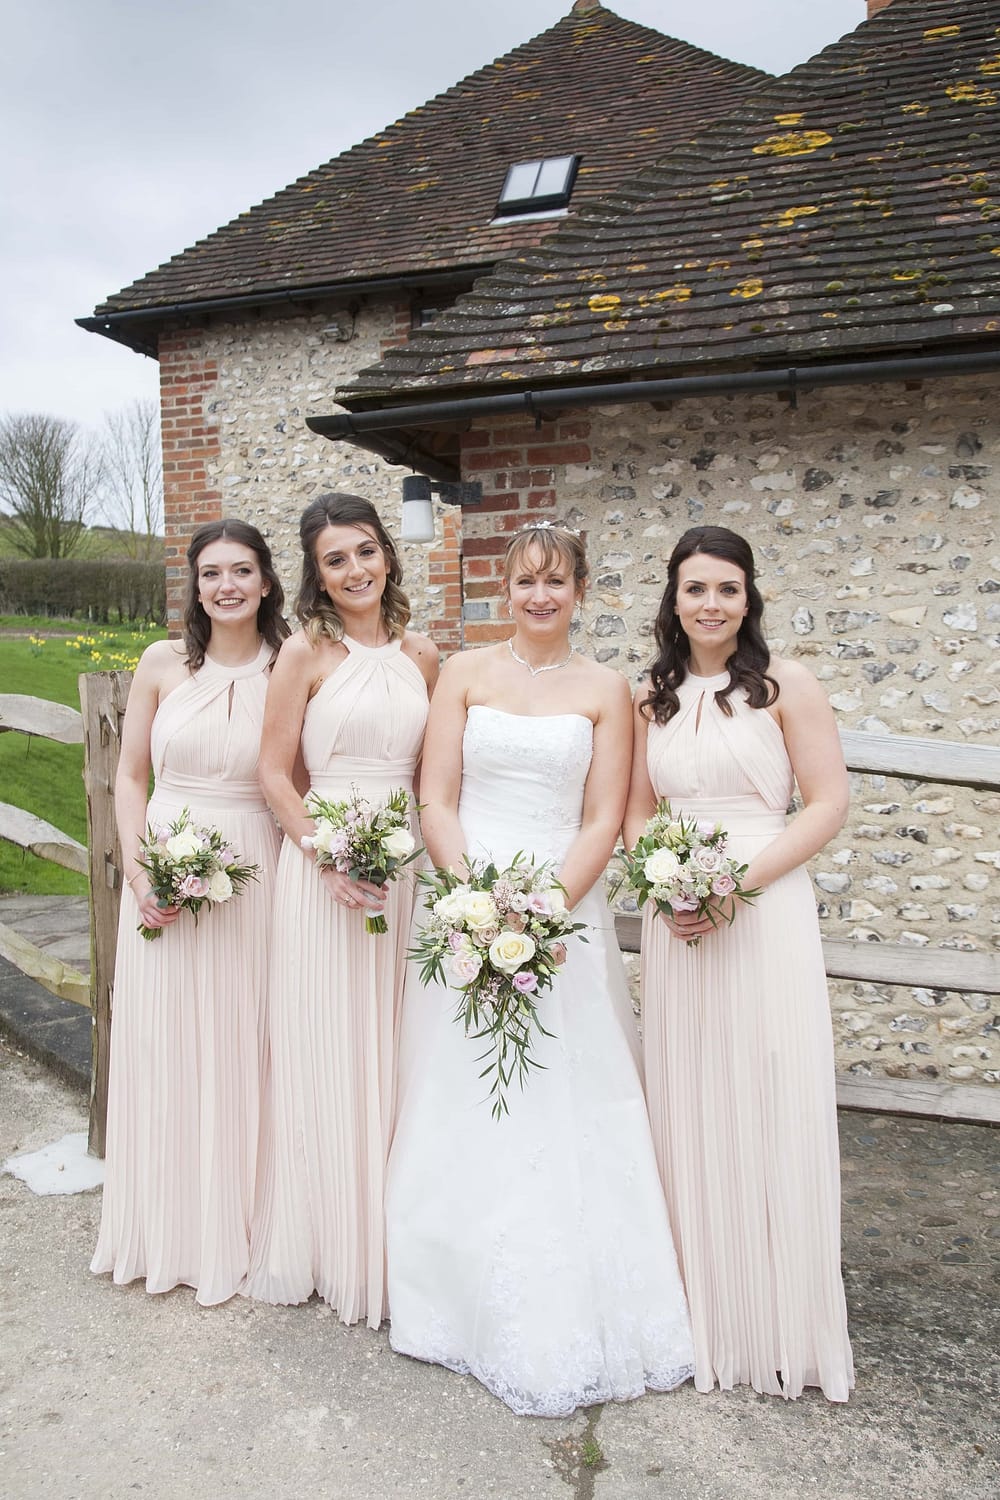 Pangdean barn April wedding. Bride and bridesmaids in nude blush pink dresses with pink and white flowers